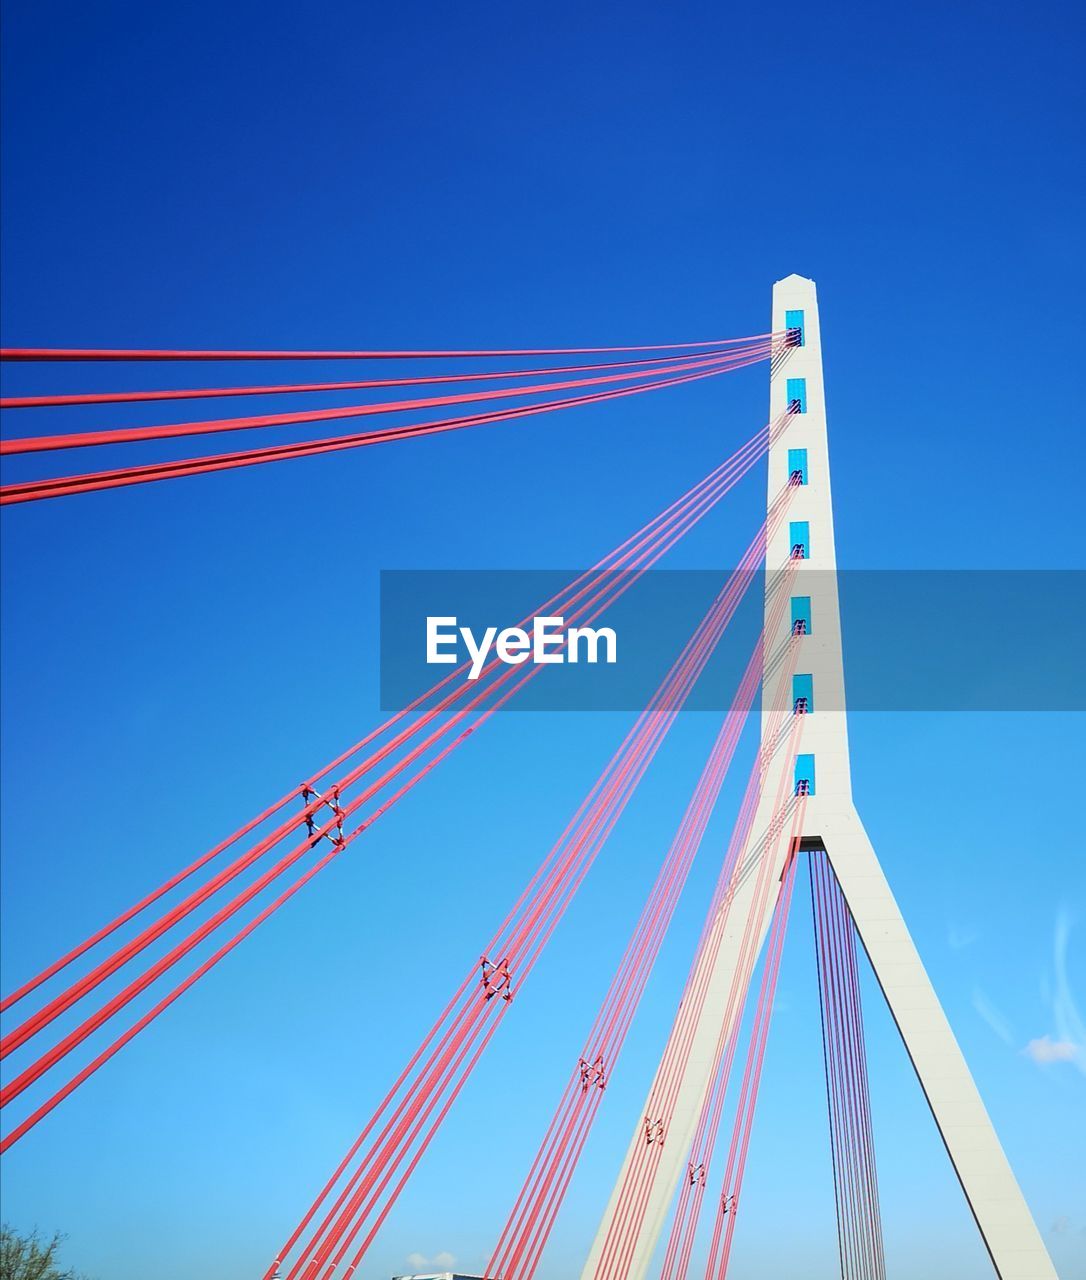 LOW ANGLE VIEW OF SUSPENSION BRIDGE AGAINST CLEAR SKY